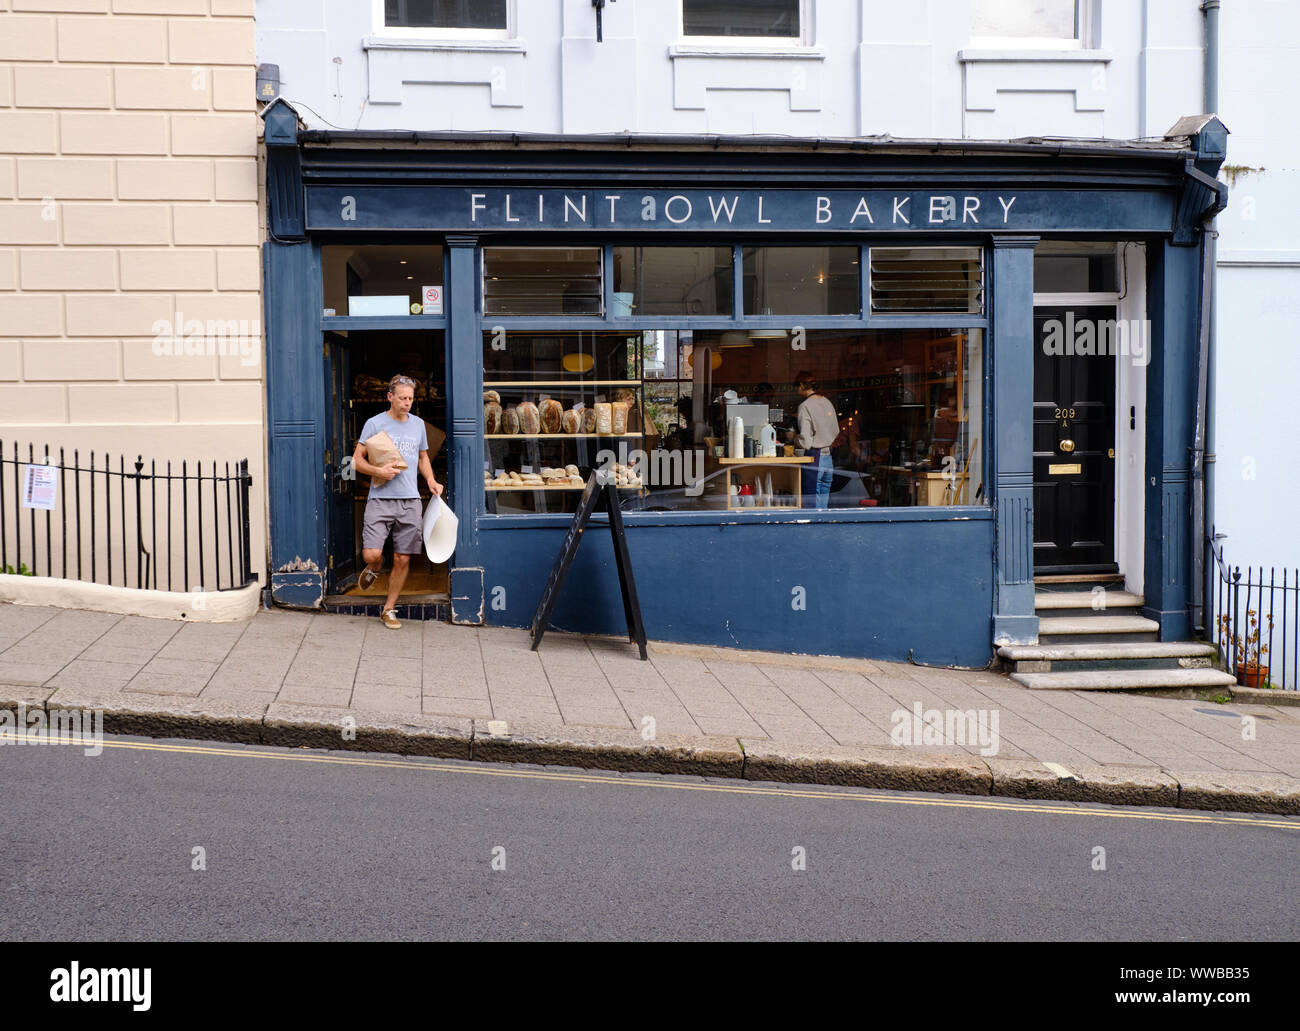 Person coming out of Flint owl Bakery on inclined High Street, Lewes, carrying bread purchase from establishment. Lewes, High Street Stock Photo